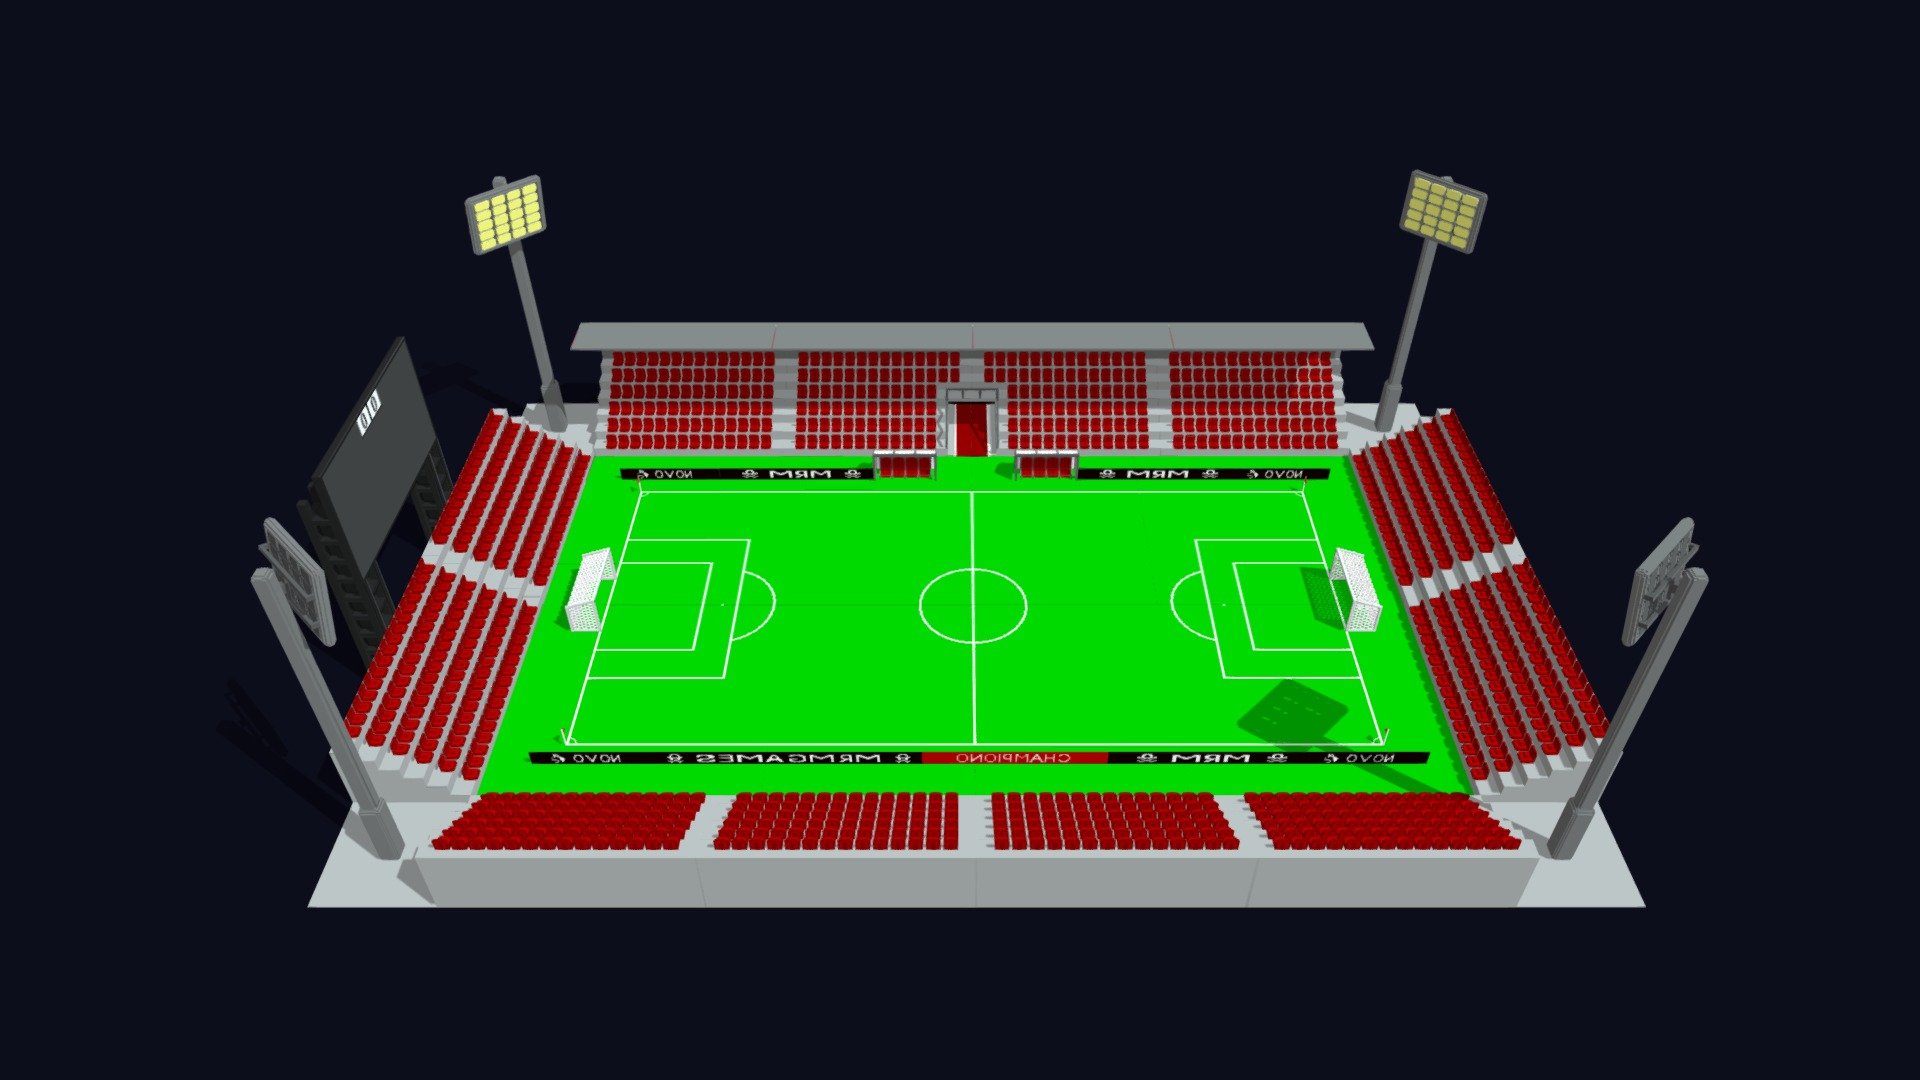 Football ( Soccer) Modular Stadium pack made in Voxel style !

Game ready assets with easy set up for your lowpoly game 

Contain 2 teams ( 22 players ) and balls !

Check more Voxel collections : 

Voxel Props Pack

Voxel Weapons

Voxel Characters

Voxel Shields

Check the aveilable Stores

By MrMustrache - Football Stadium Pack - 3D Low Poly Voxel - 3D model by MrMGames 3d model